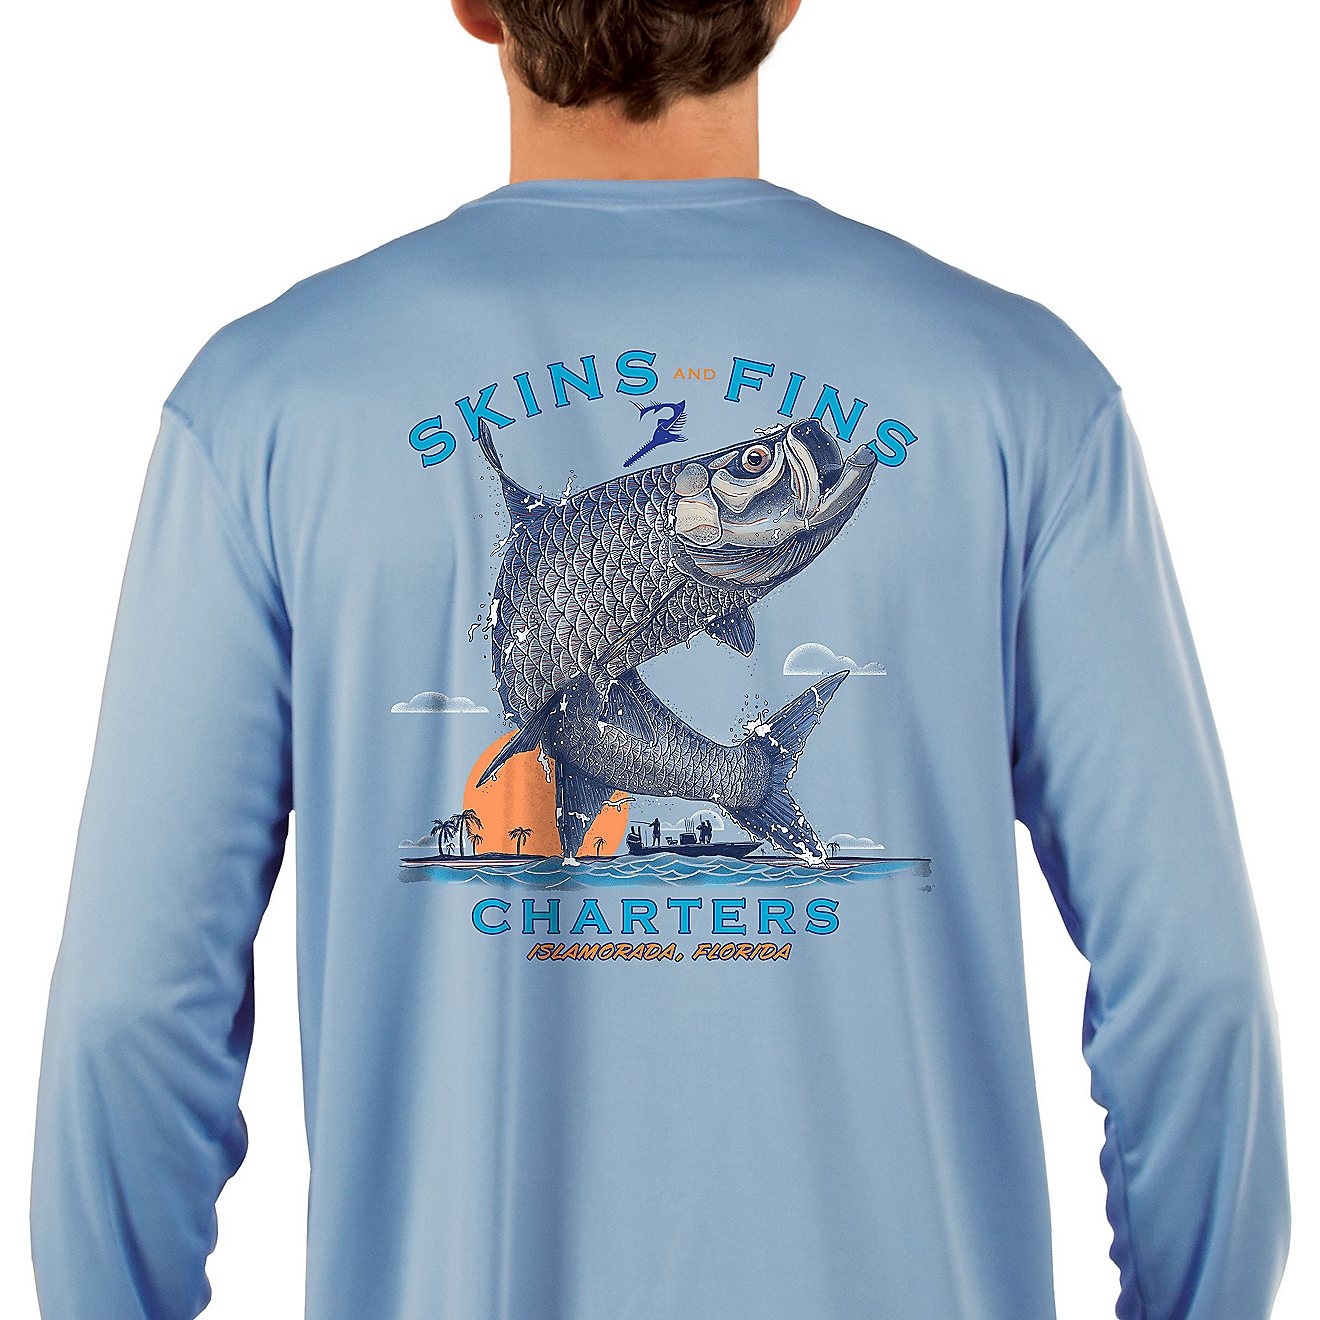 Red Tuna Men’s Skins & Fins Performance Long Sleeve T-shirt                                                                    - view number 1